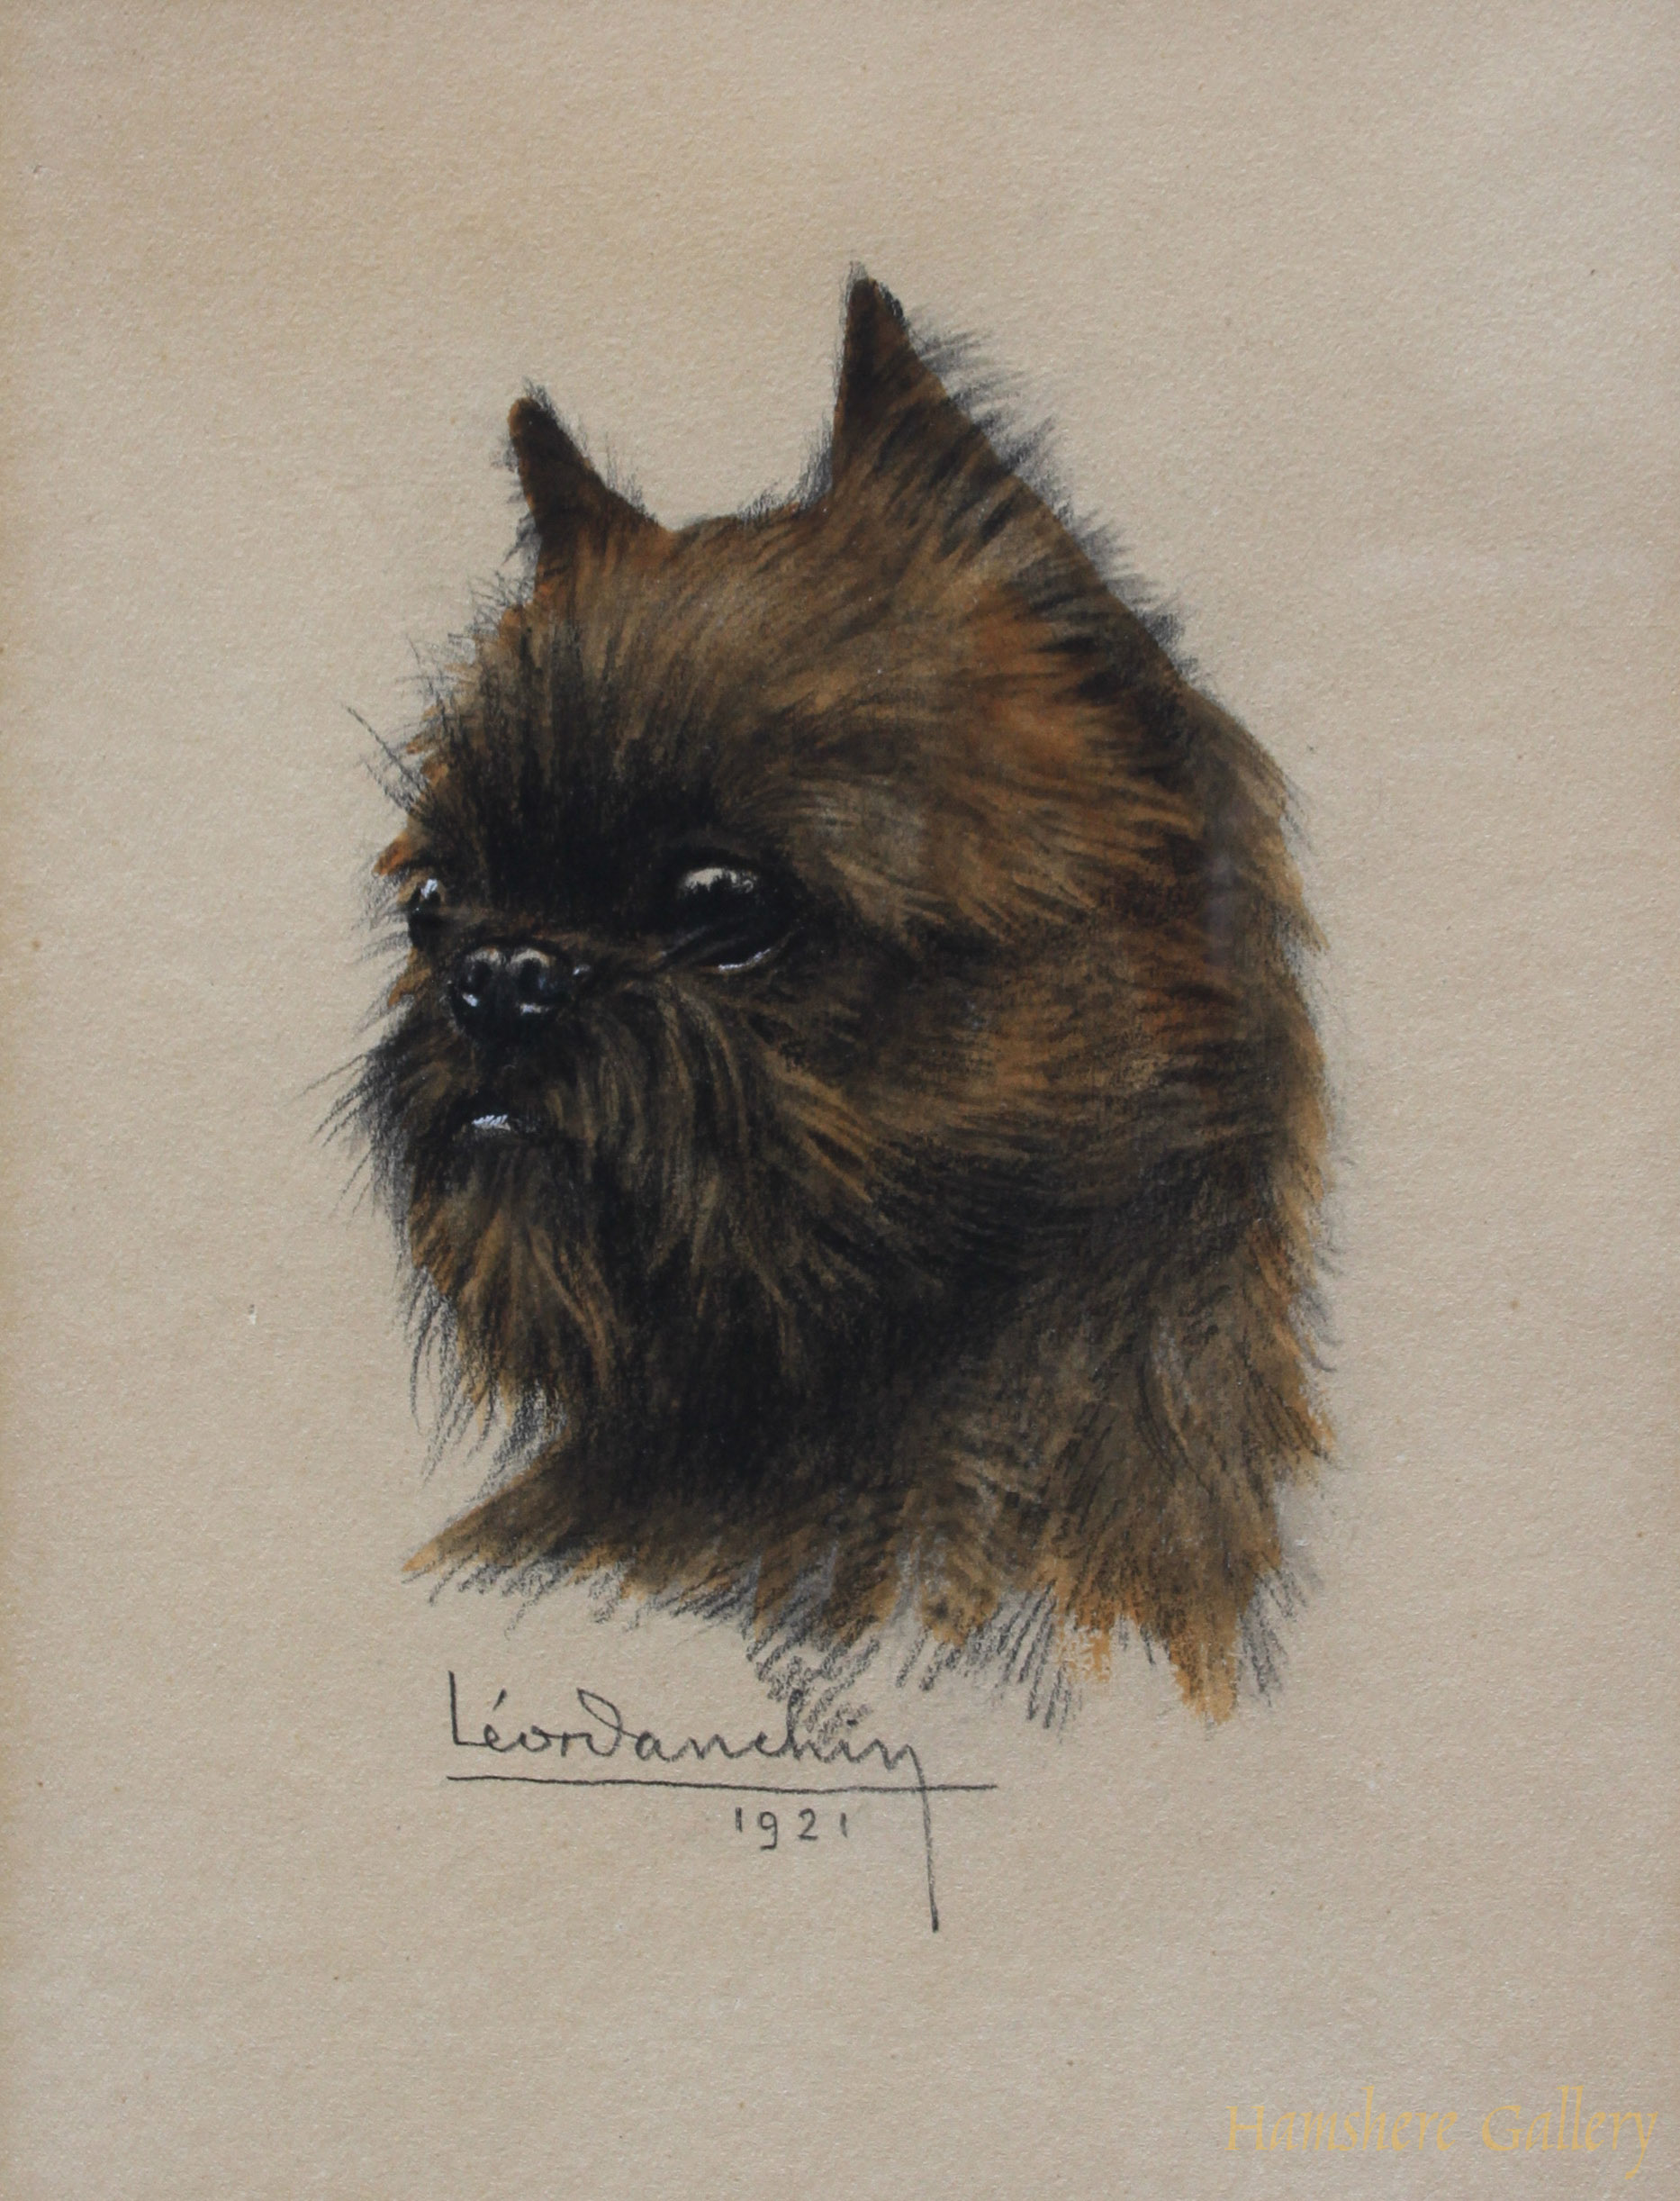 Brabancon,King Charles,Griffons d’Ecurie,English Toy Spaniel,Pug,Affenpinscher,Brussels Griffon,history